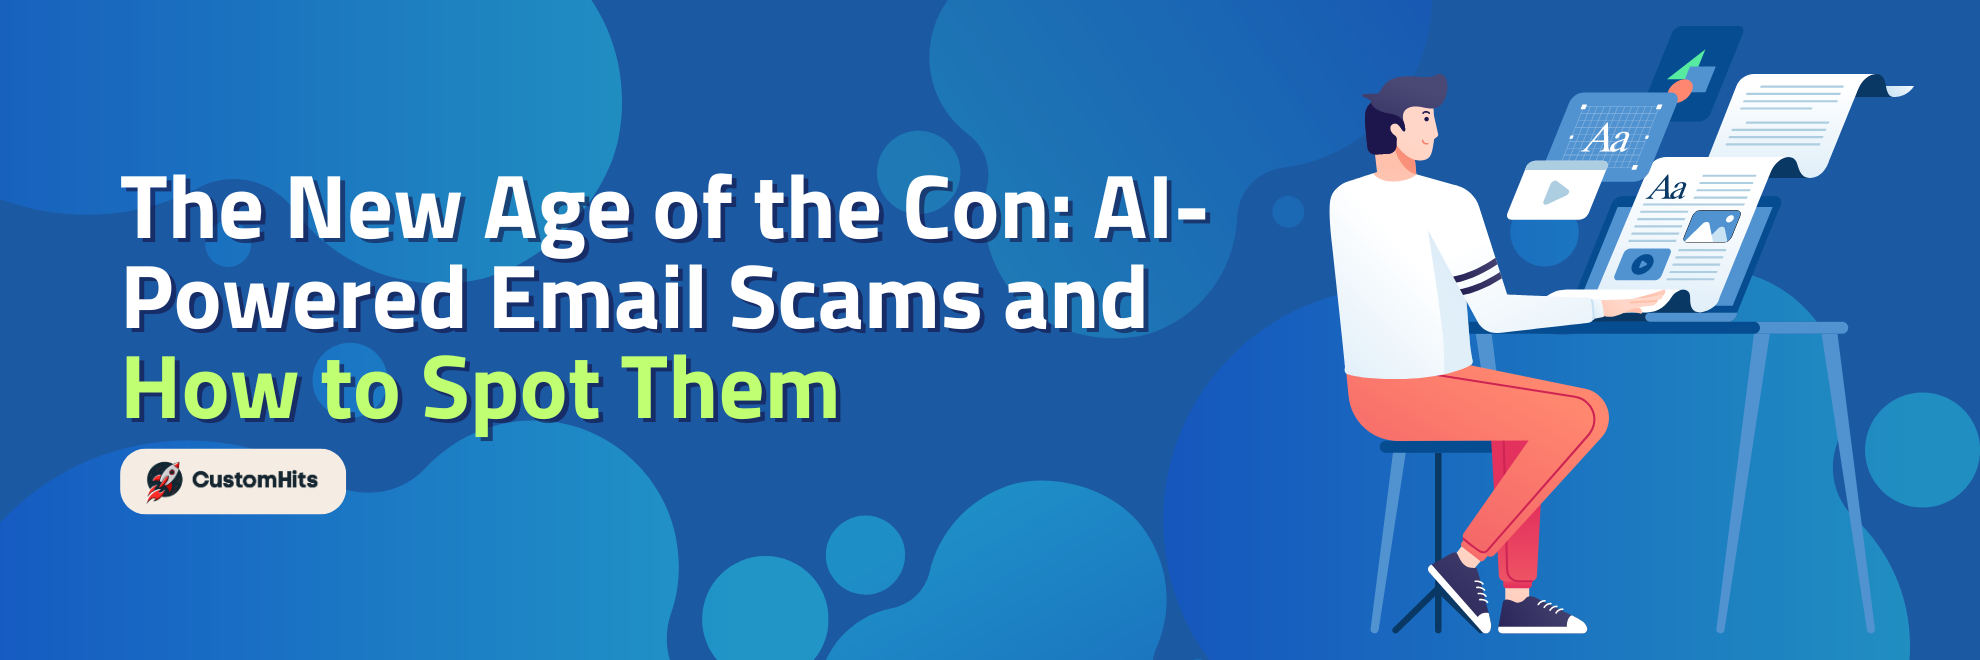 The New Age of the Con: AI-Powered Email Scams and How to Spot Them